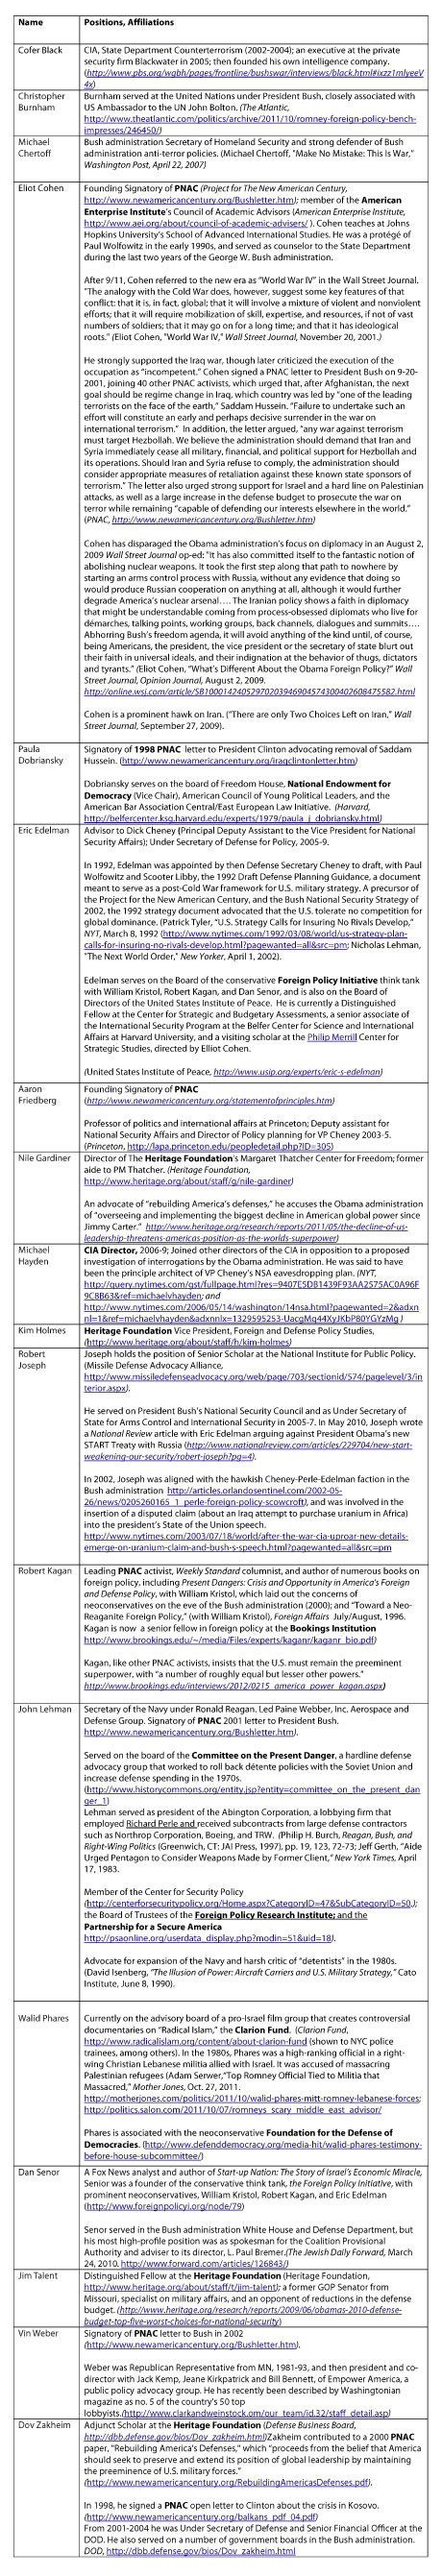 Table 1. Romney Foreign Policy Advisers: Positions and Affiliations (think tanks in bold)